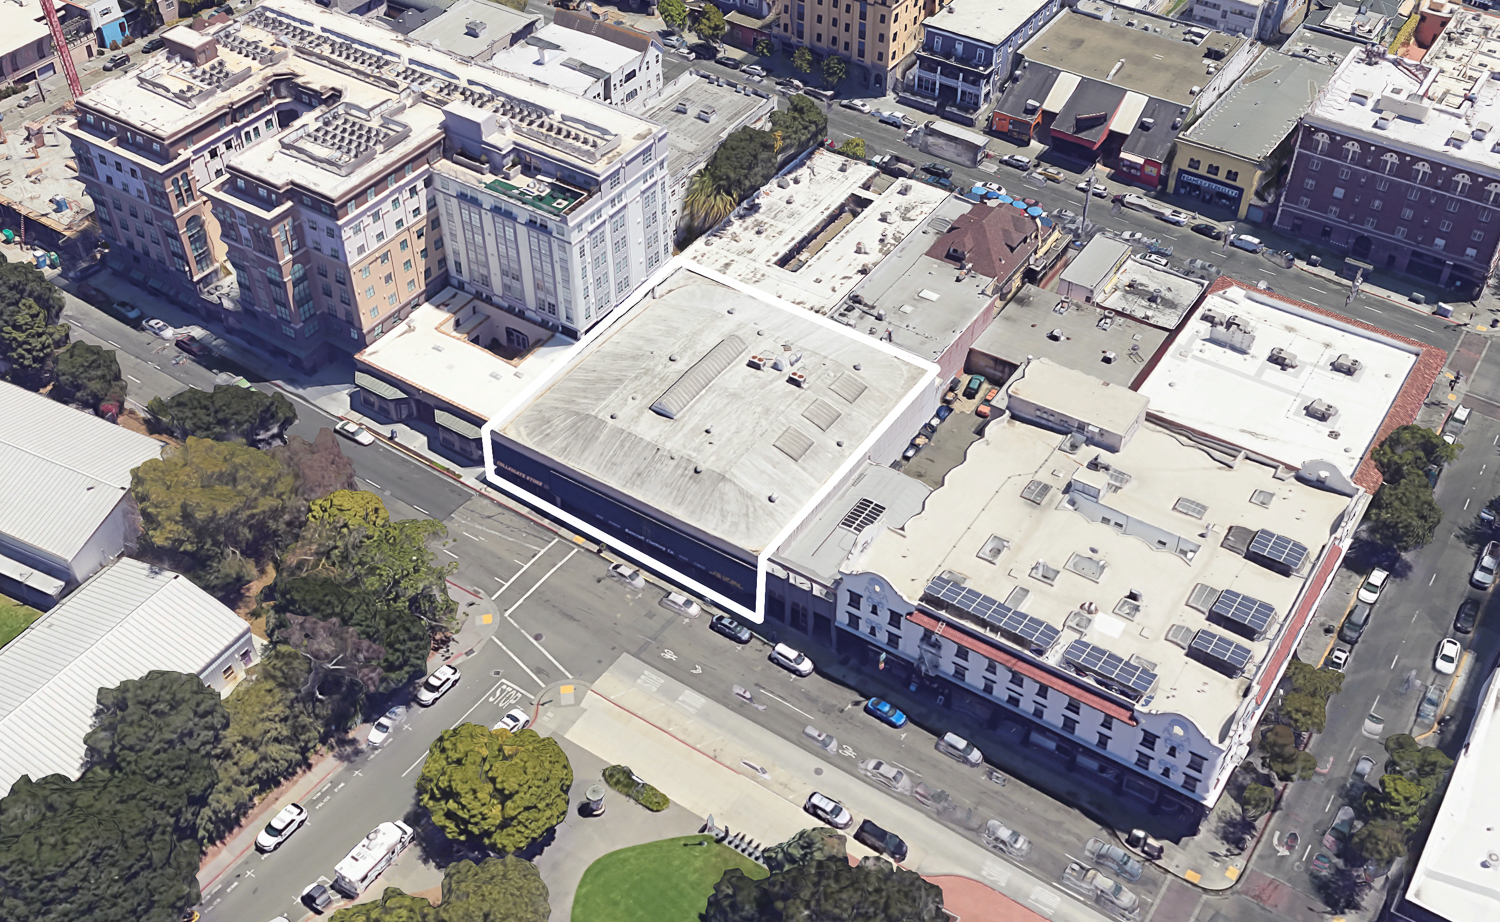 2530 Bancroft Way outlined approximately by YIMBY, image via Google Satellite